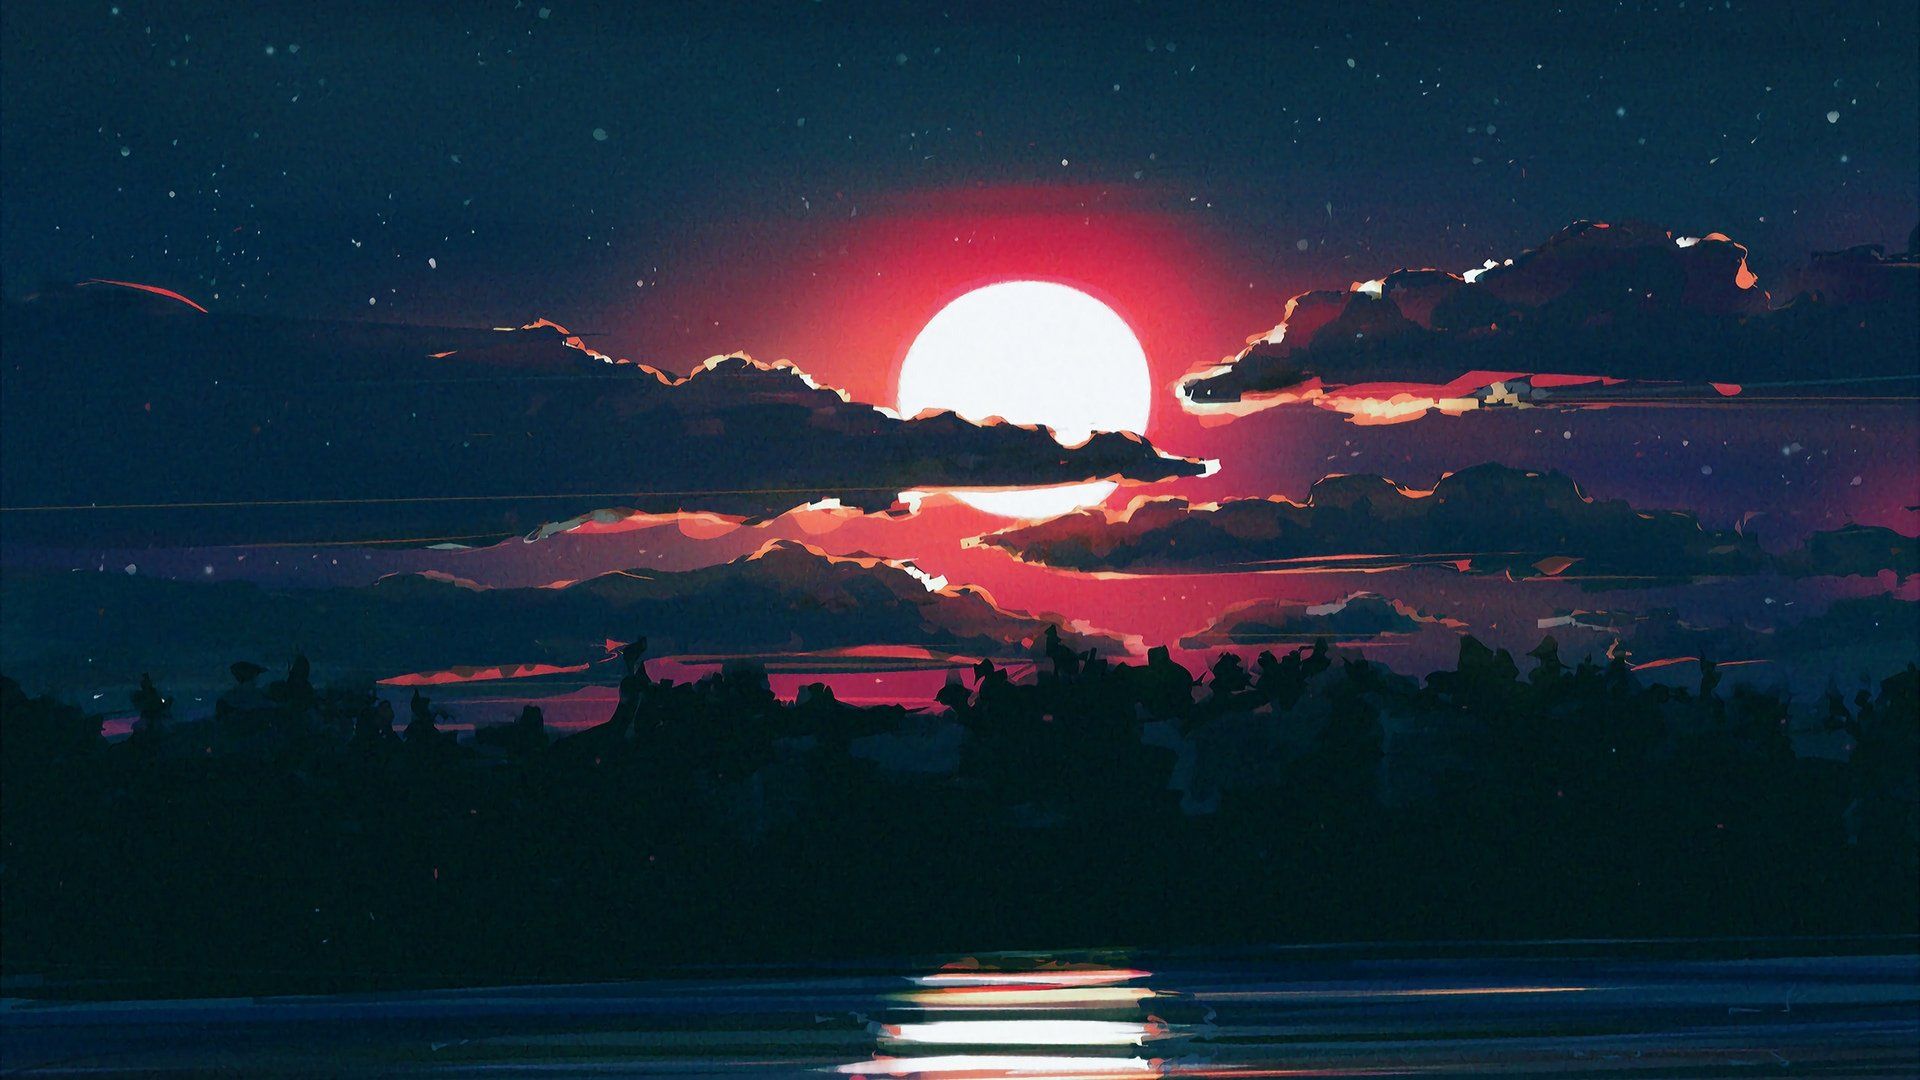 Aesthetic anime sunset wallpaper with a lake - Laptop, 1920x1080